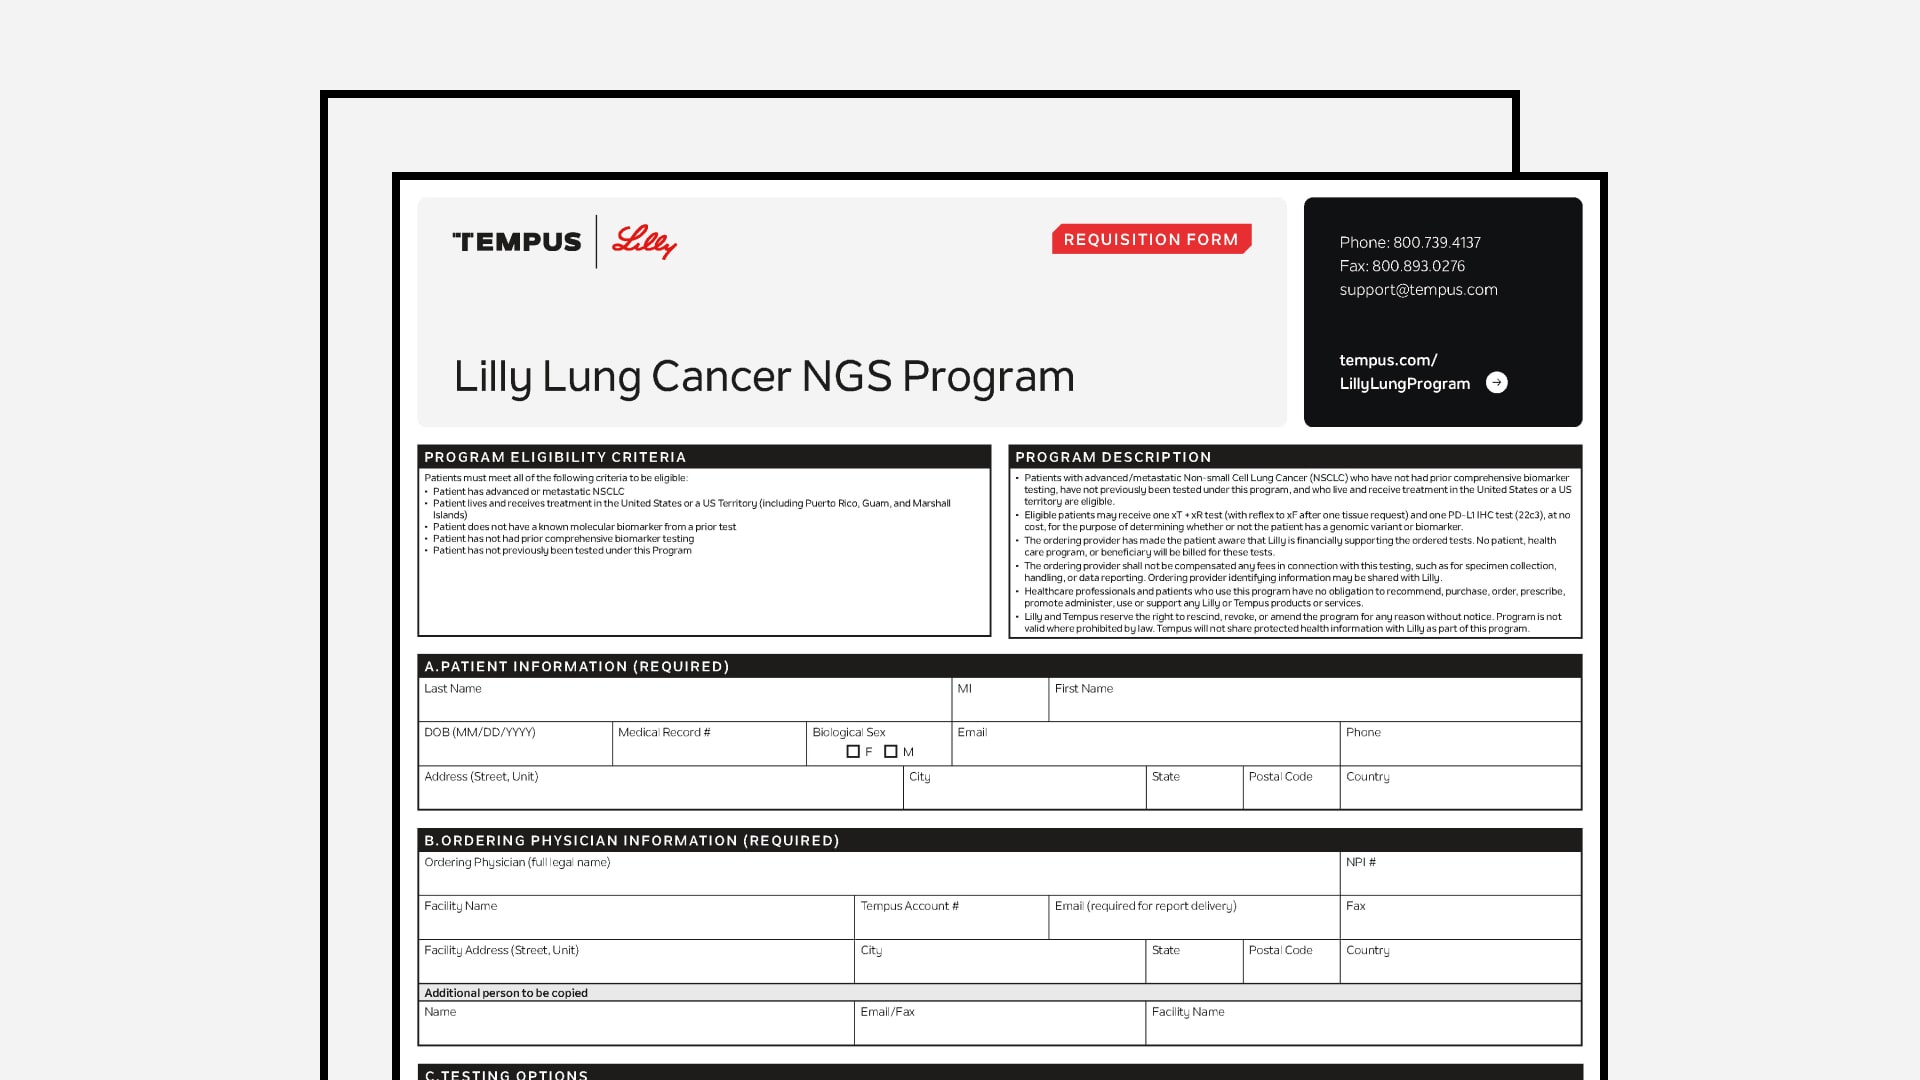 Requisition Form (Lilly Lung Program)